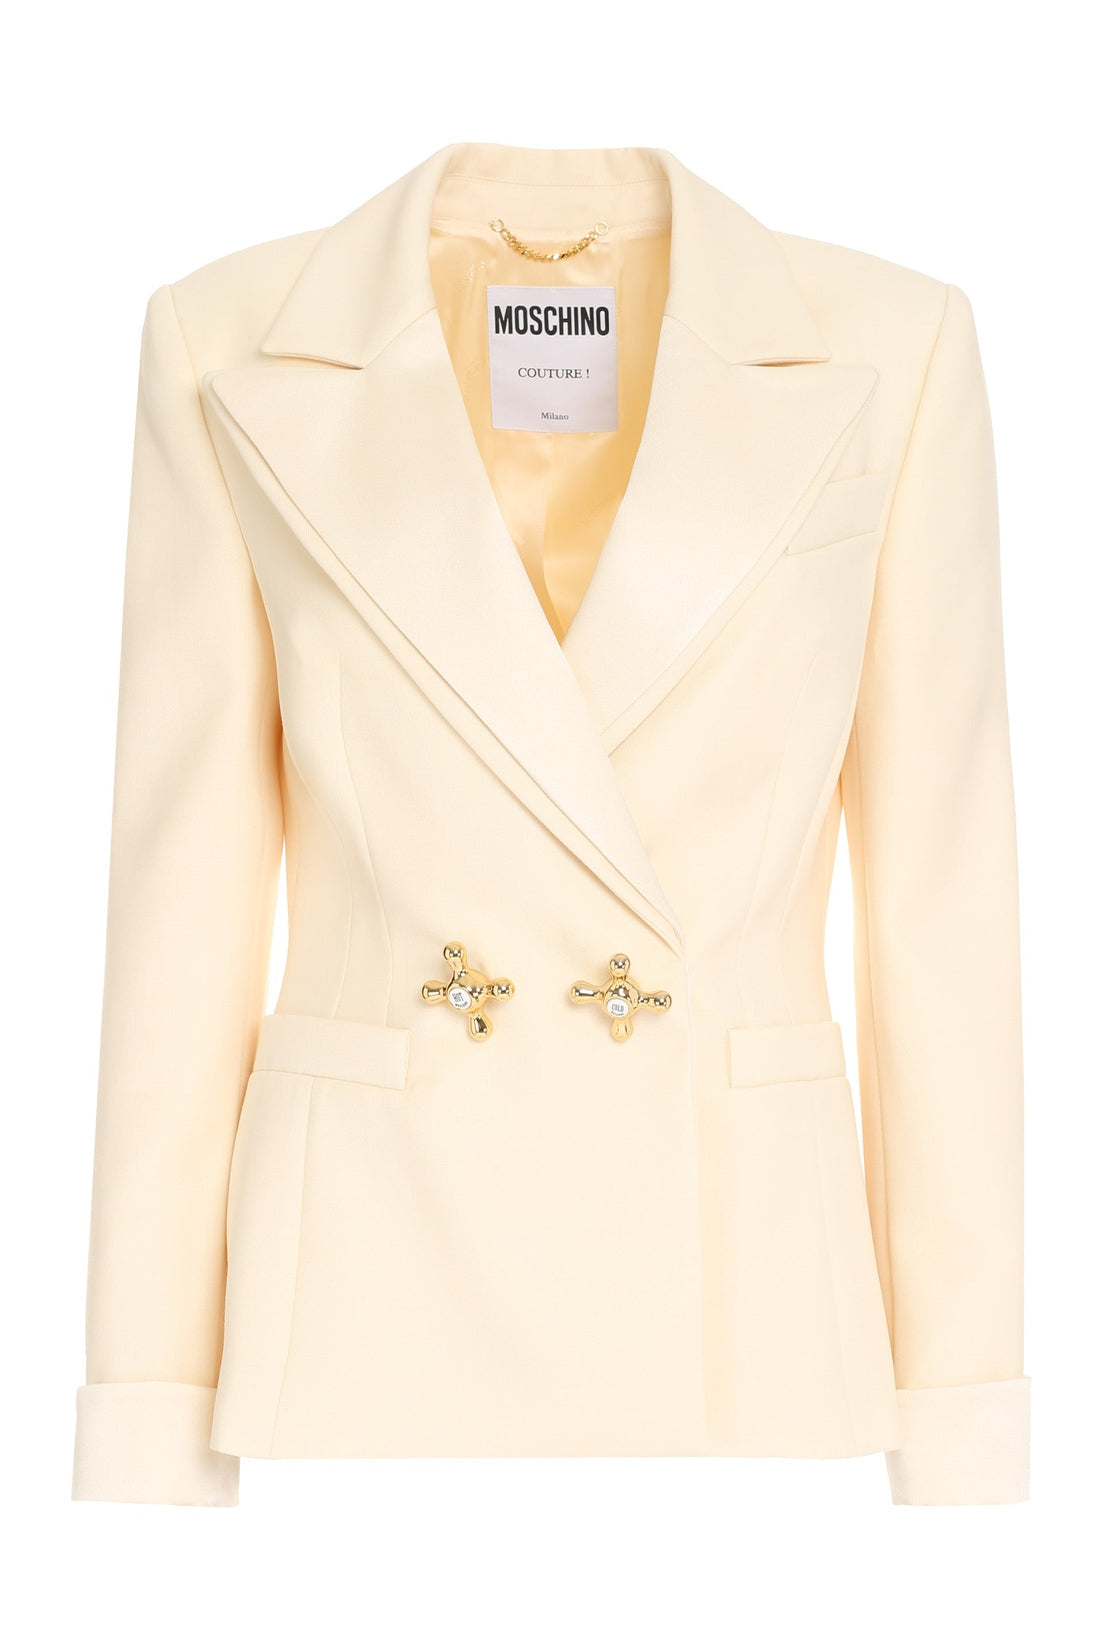 Moschino-OUTLET-SALE-Double-breasted wool blazer-ARCHIVIST